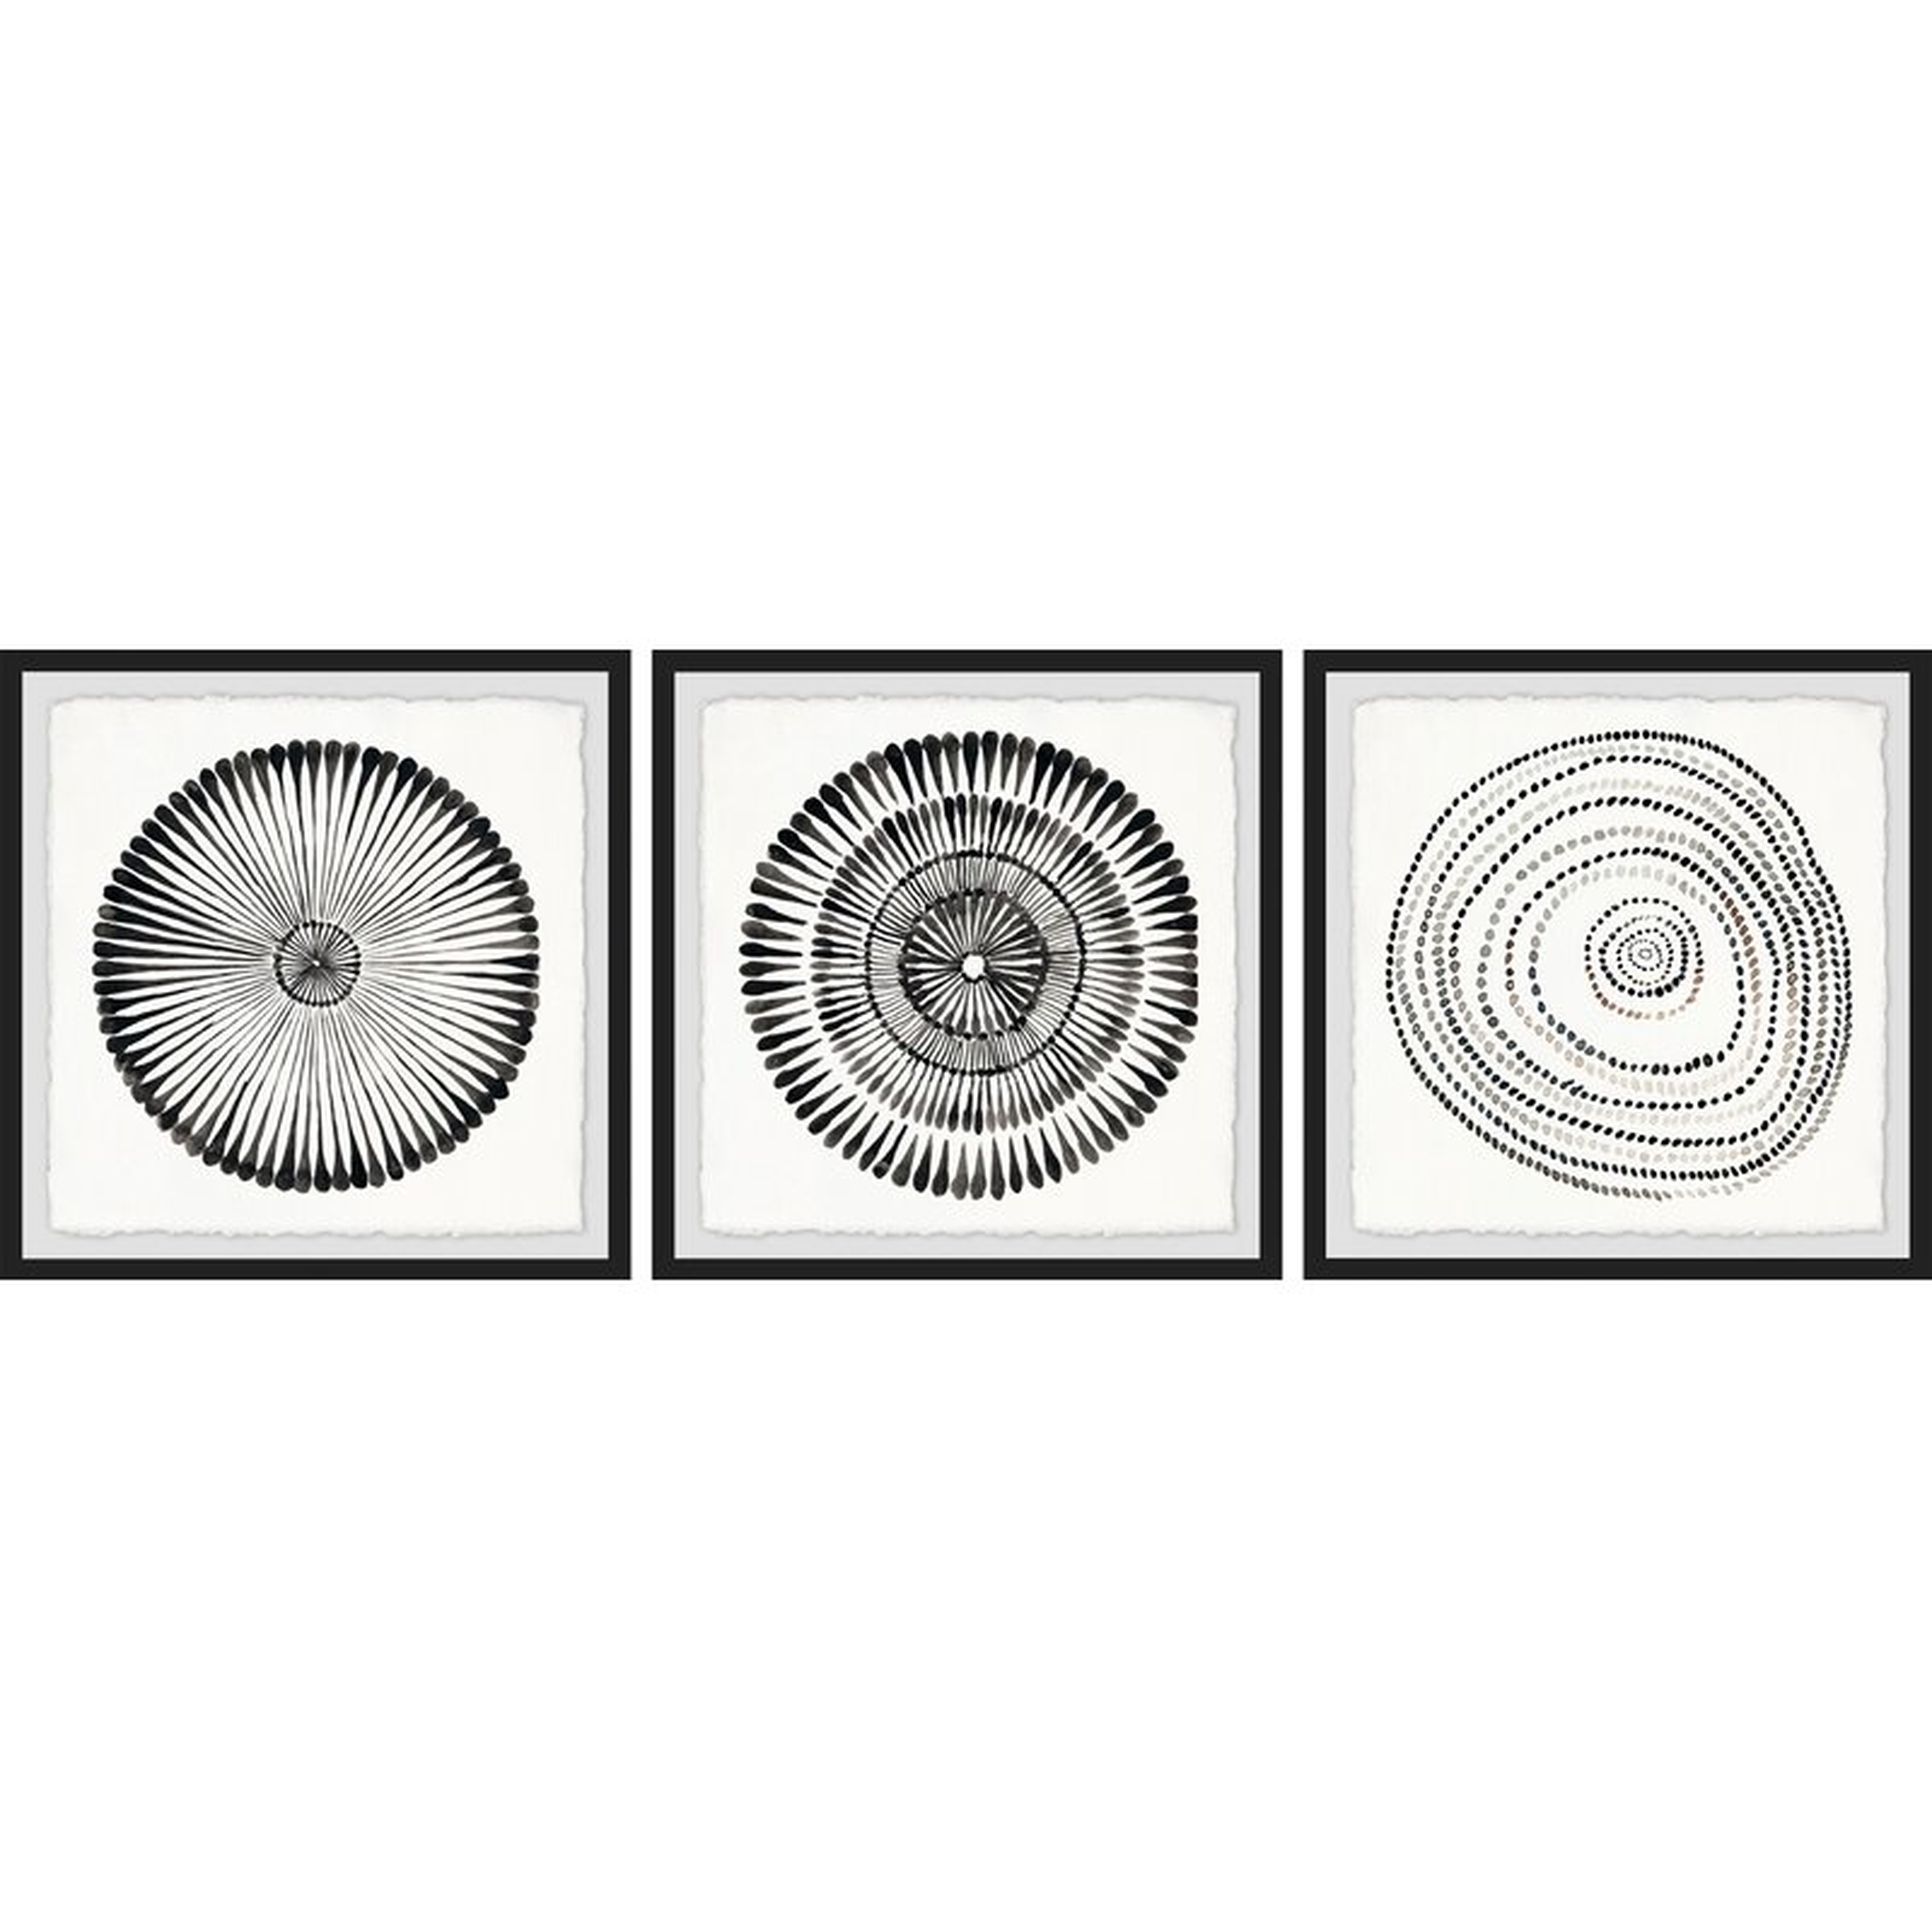 Circle Bloom Triptych - 3 Piece Picture Frame Print Set on Paper  Circle Bloom Triptych - 3 Piece Picture Frame Print Set on Paper  Circle Bloom Triptych - 3 Piece Picture Frame Print Set on Paper  Circle Bloom Triptych - 3 Piece Pictu - Wayfair